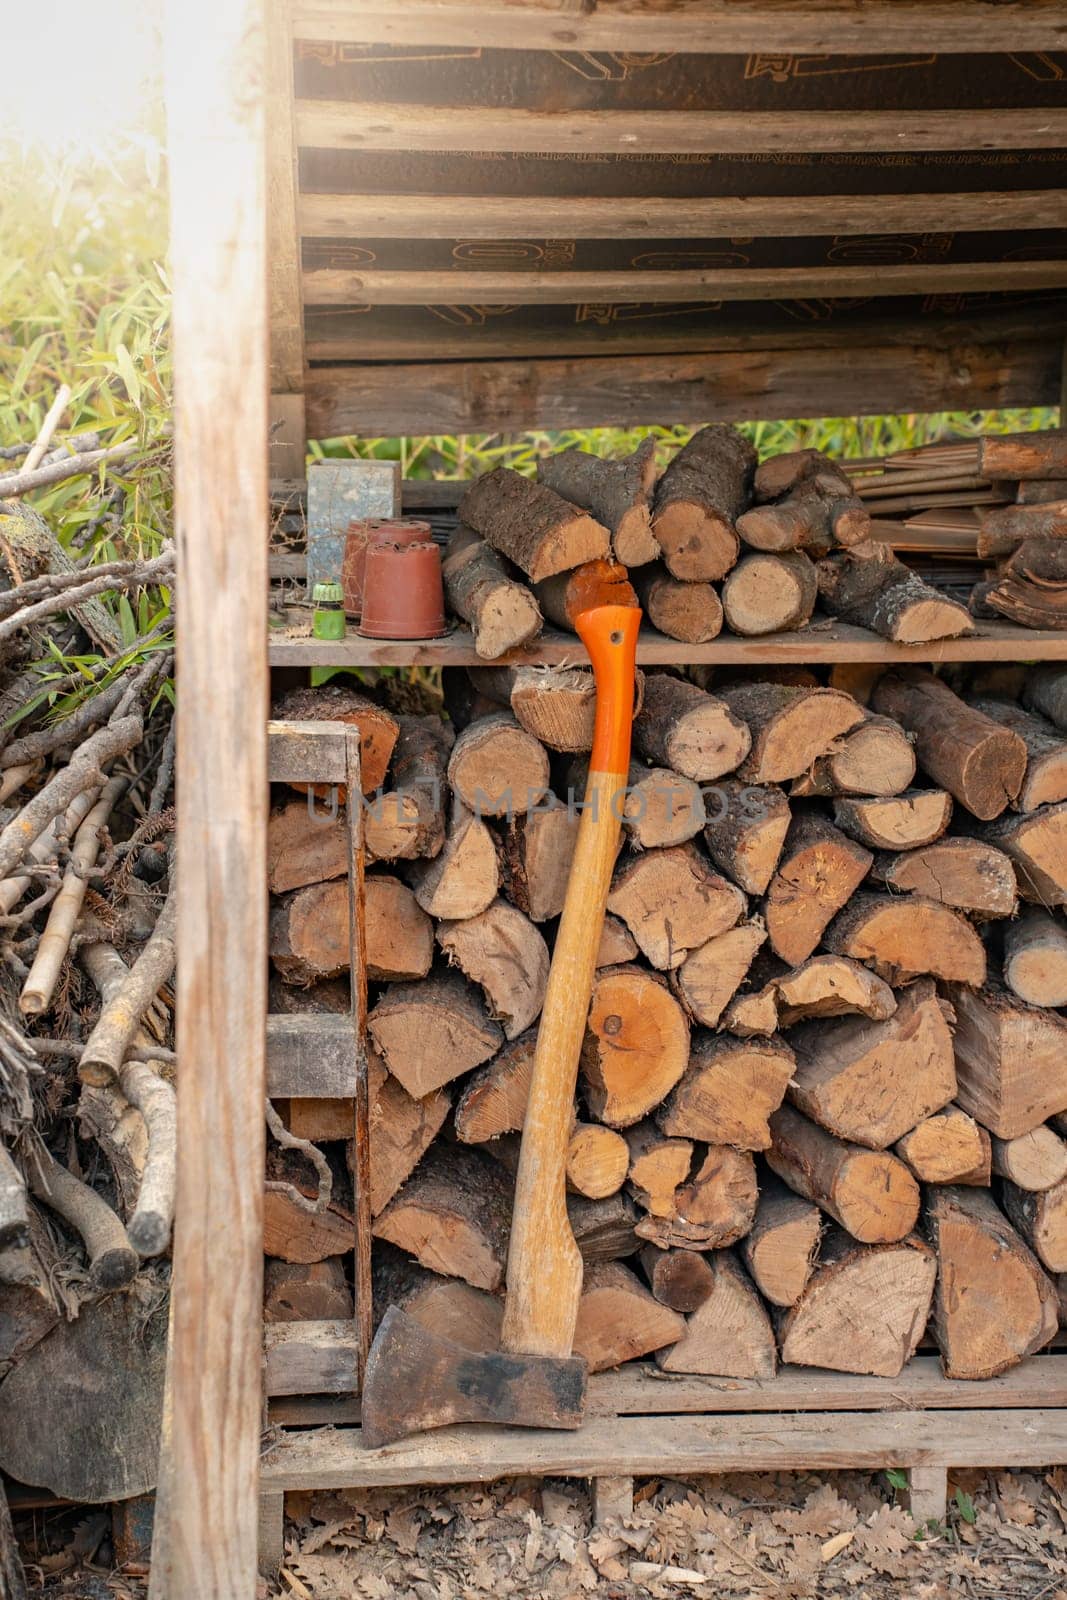 Axe in front of a pile of wood in a woodshed. Natural background. by PaulCarr